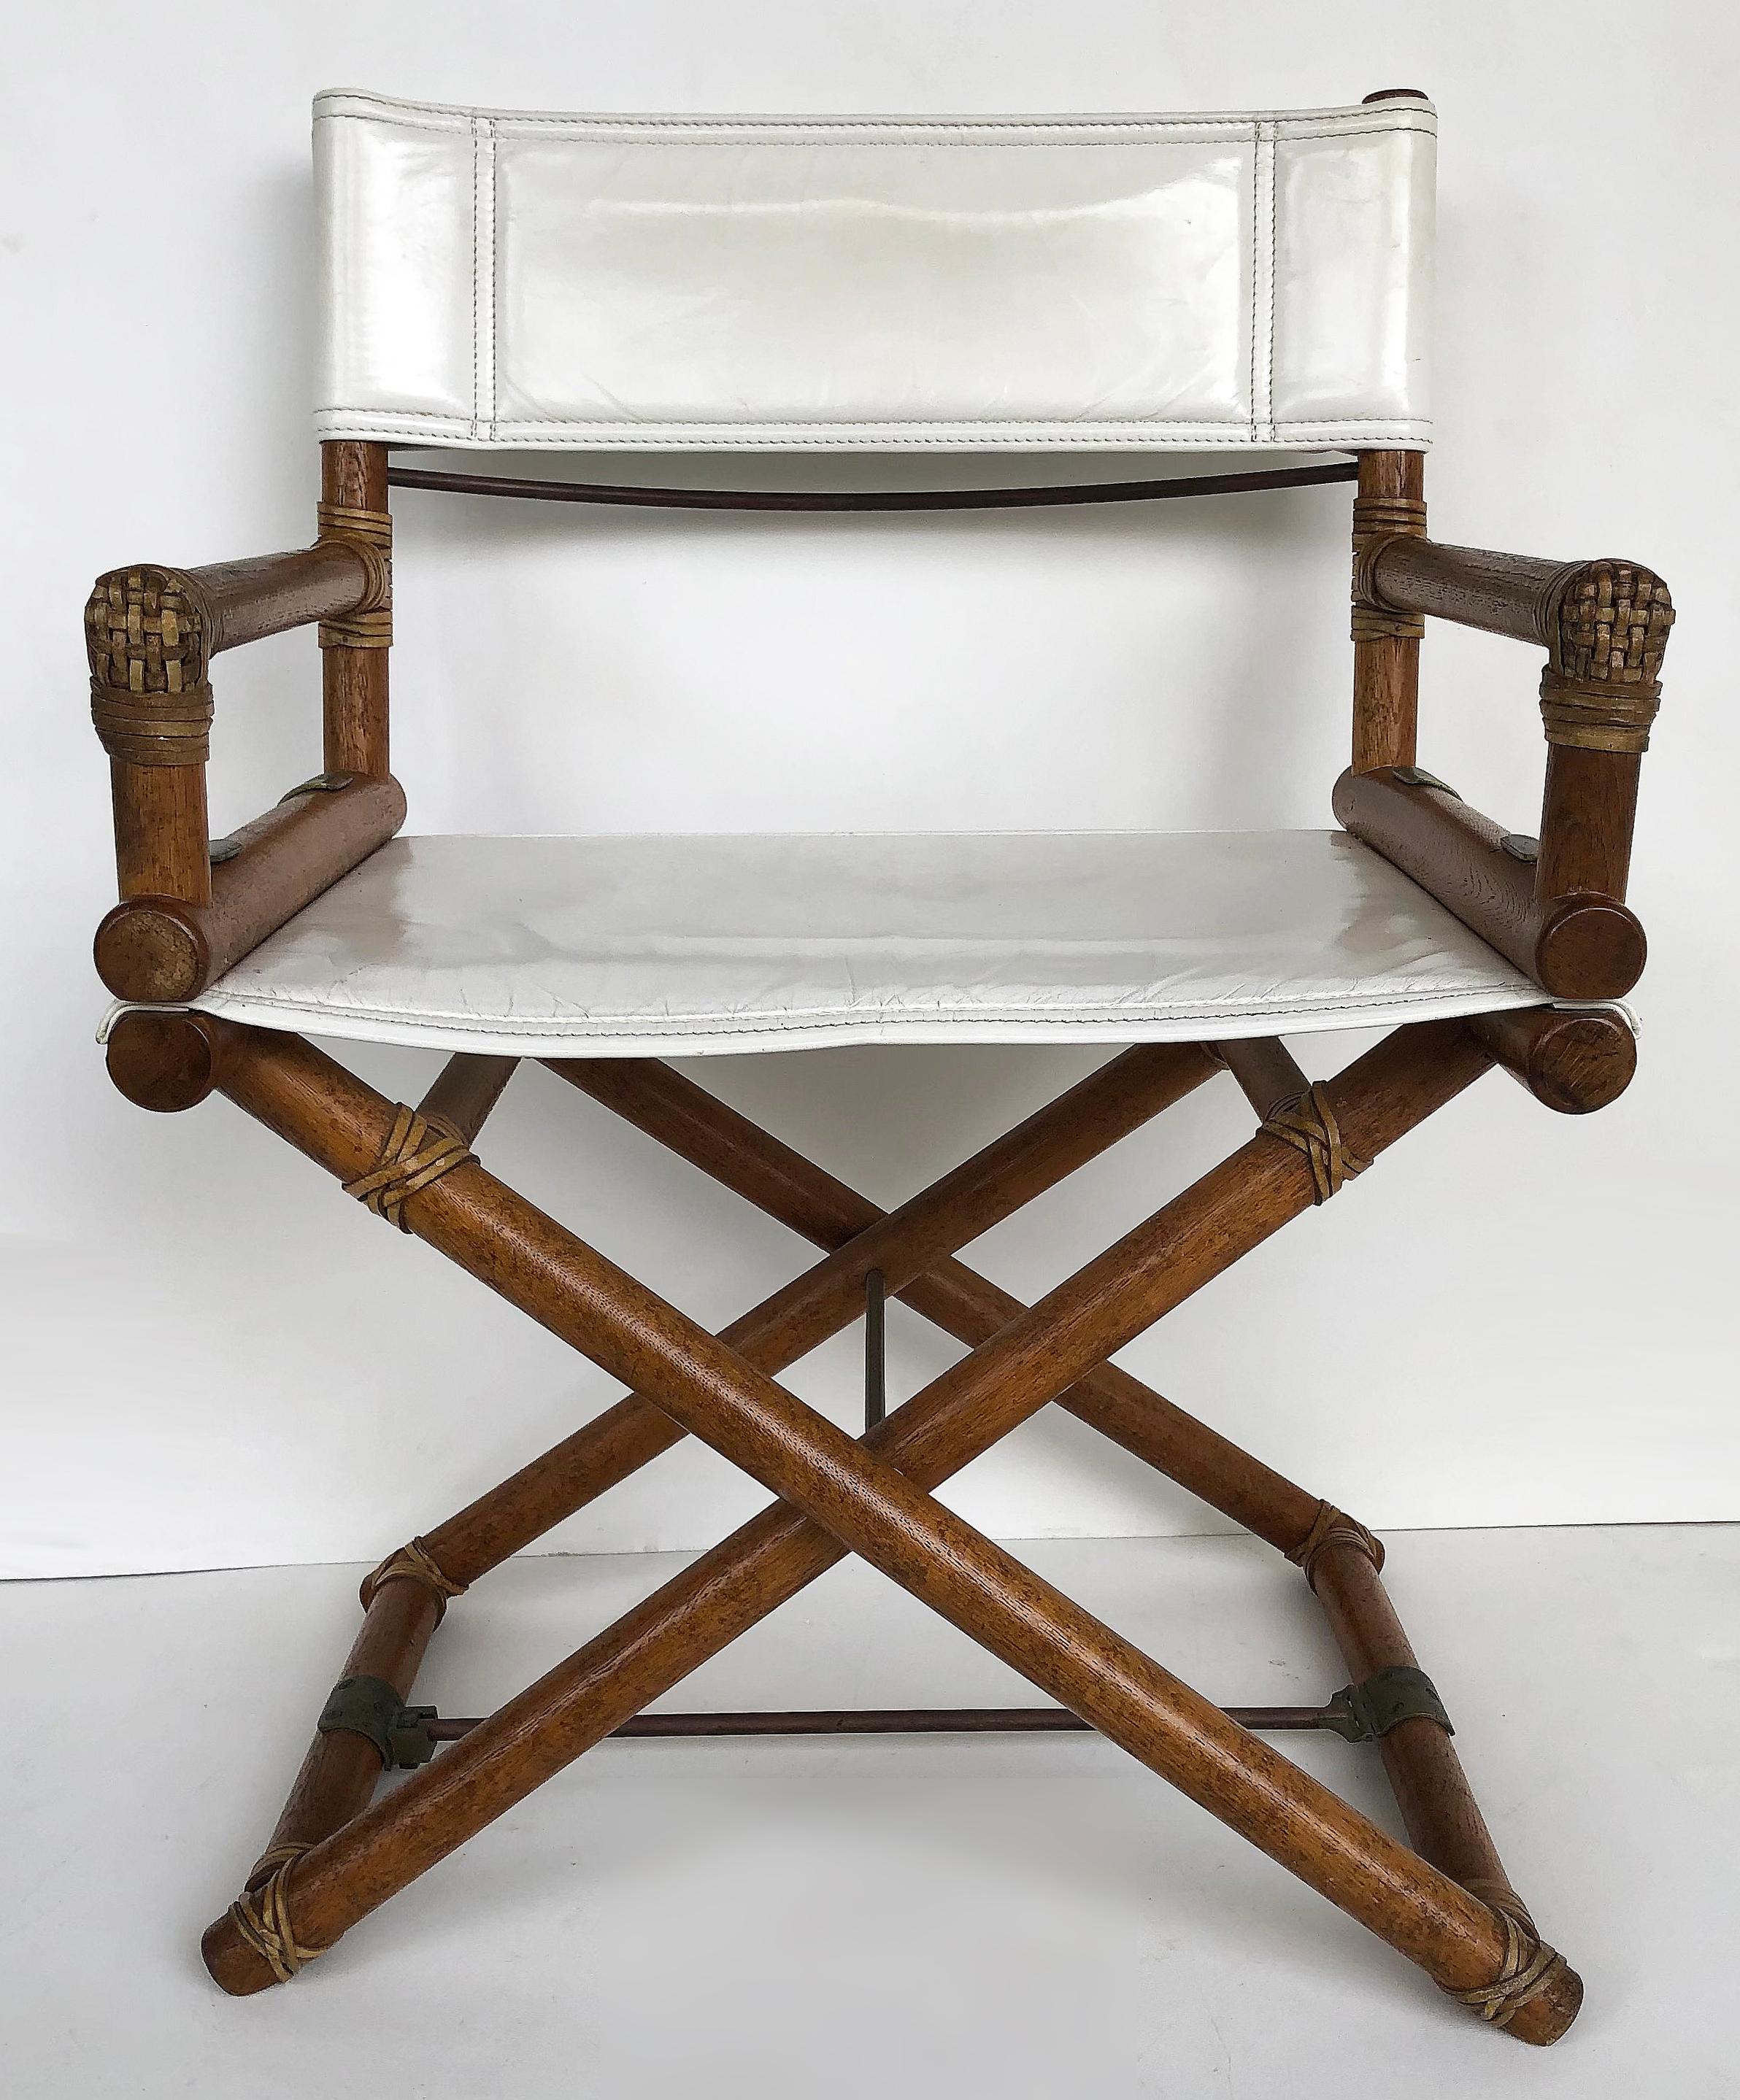 McGuire San Francisco oak director's chairs, leather and brass, pair

Offered for sale is a pair of fine quality oak, leather, and brass director's chair from McGuire Furniture of San Francisco. McGuire director chairs were first designed by